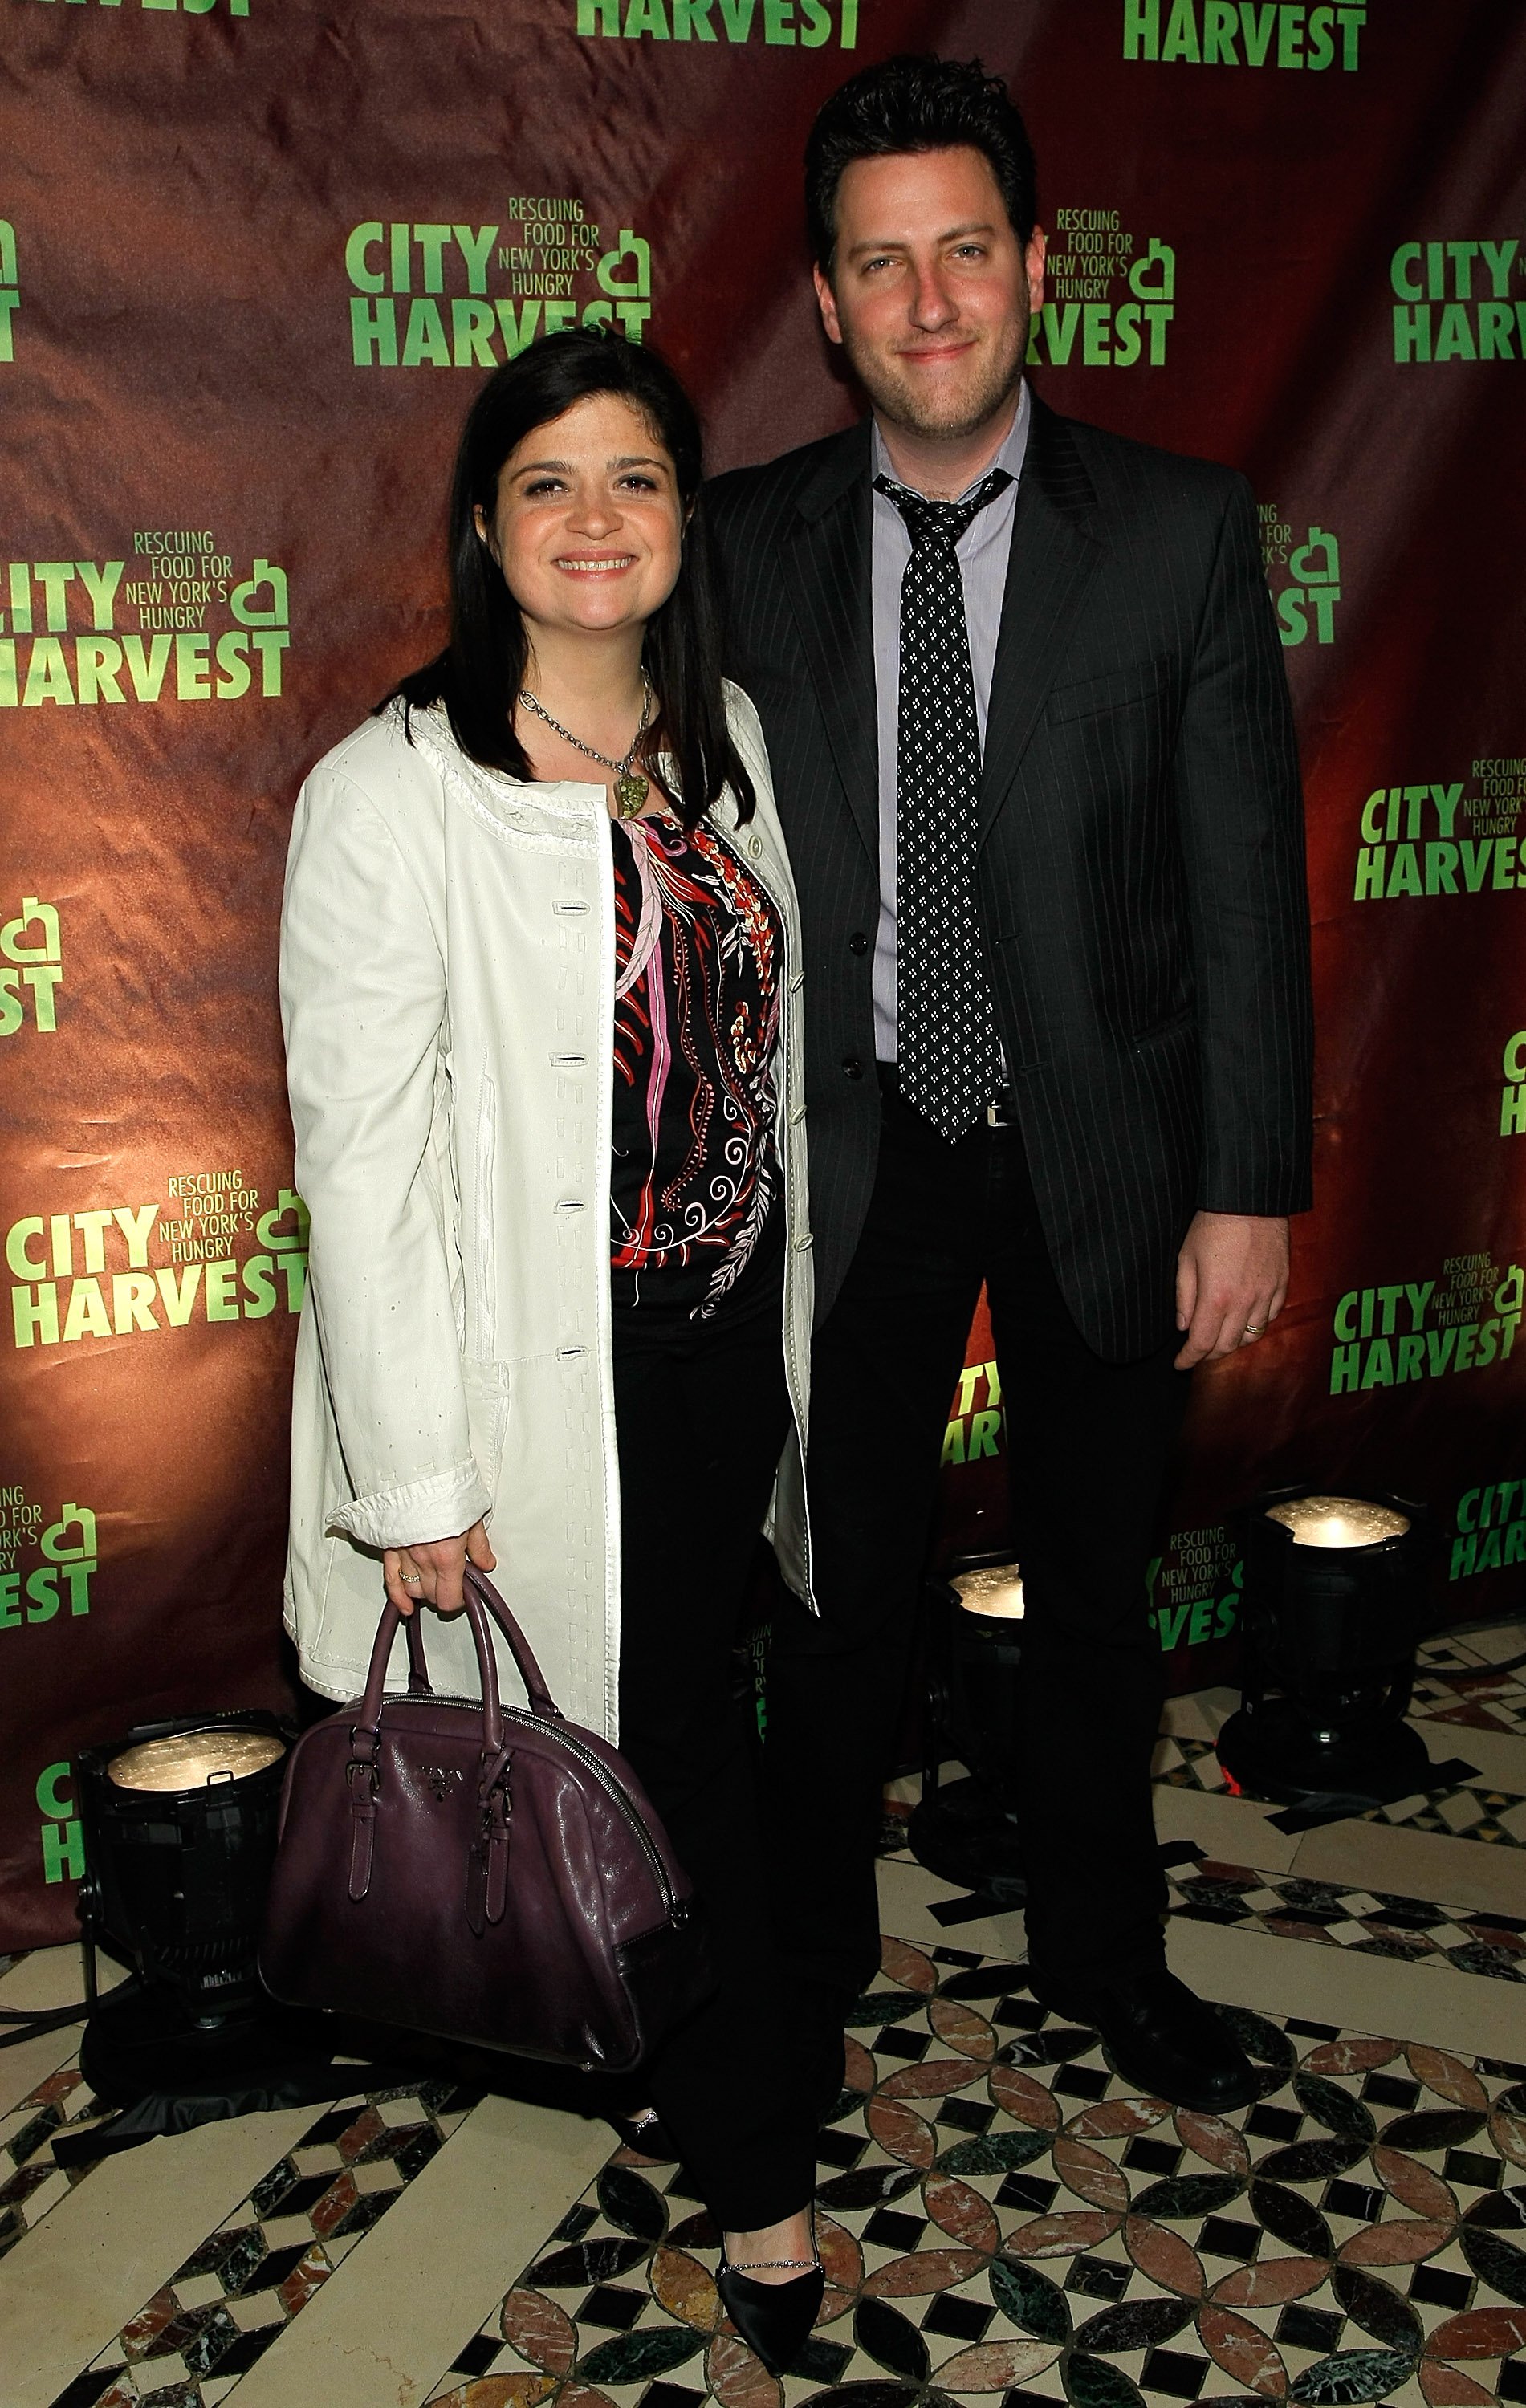 Chef Alexandra Guarnaschelli and guest arriving at An Evening of Practical Magic at Cipriani 42nd Street on April 22, 2009 in New York City. / Source: Getty Images